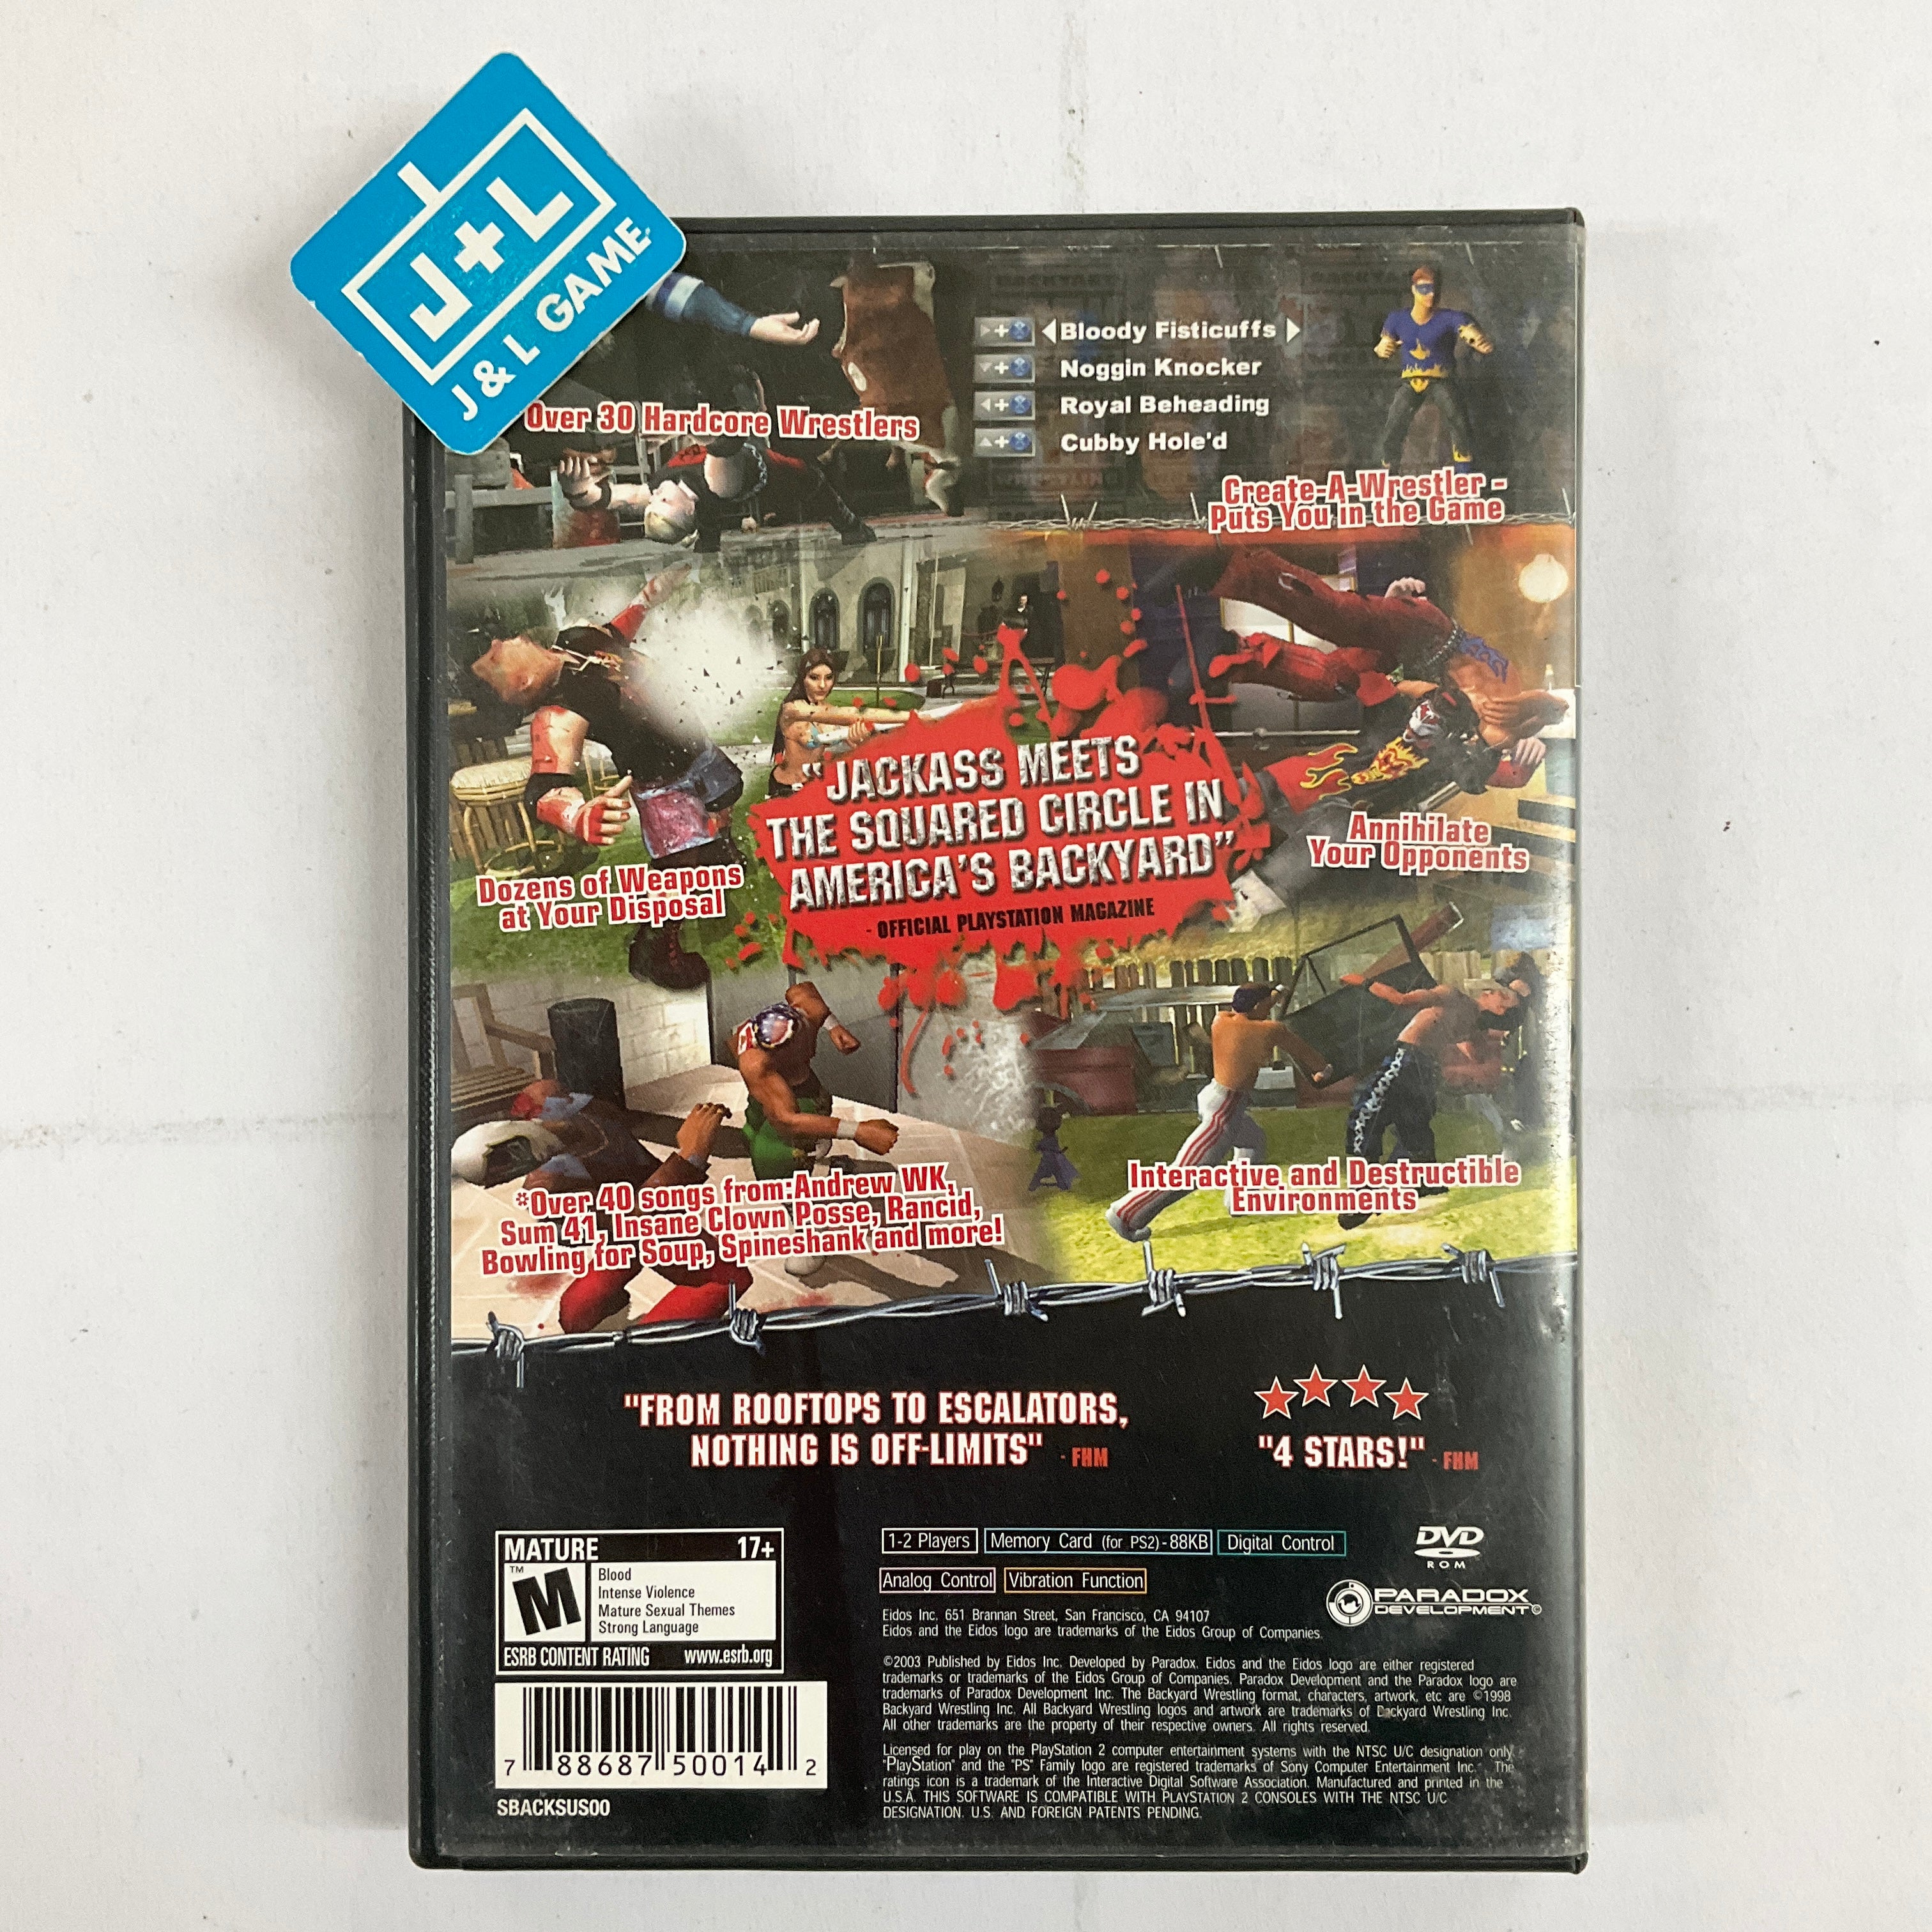 Backyard Wrestling: Don't Try This at Home (W/ DVD) - (PS2) PlayStation 2 [Pre-Owned] Video Games Eidos Interactive   